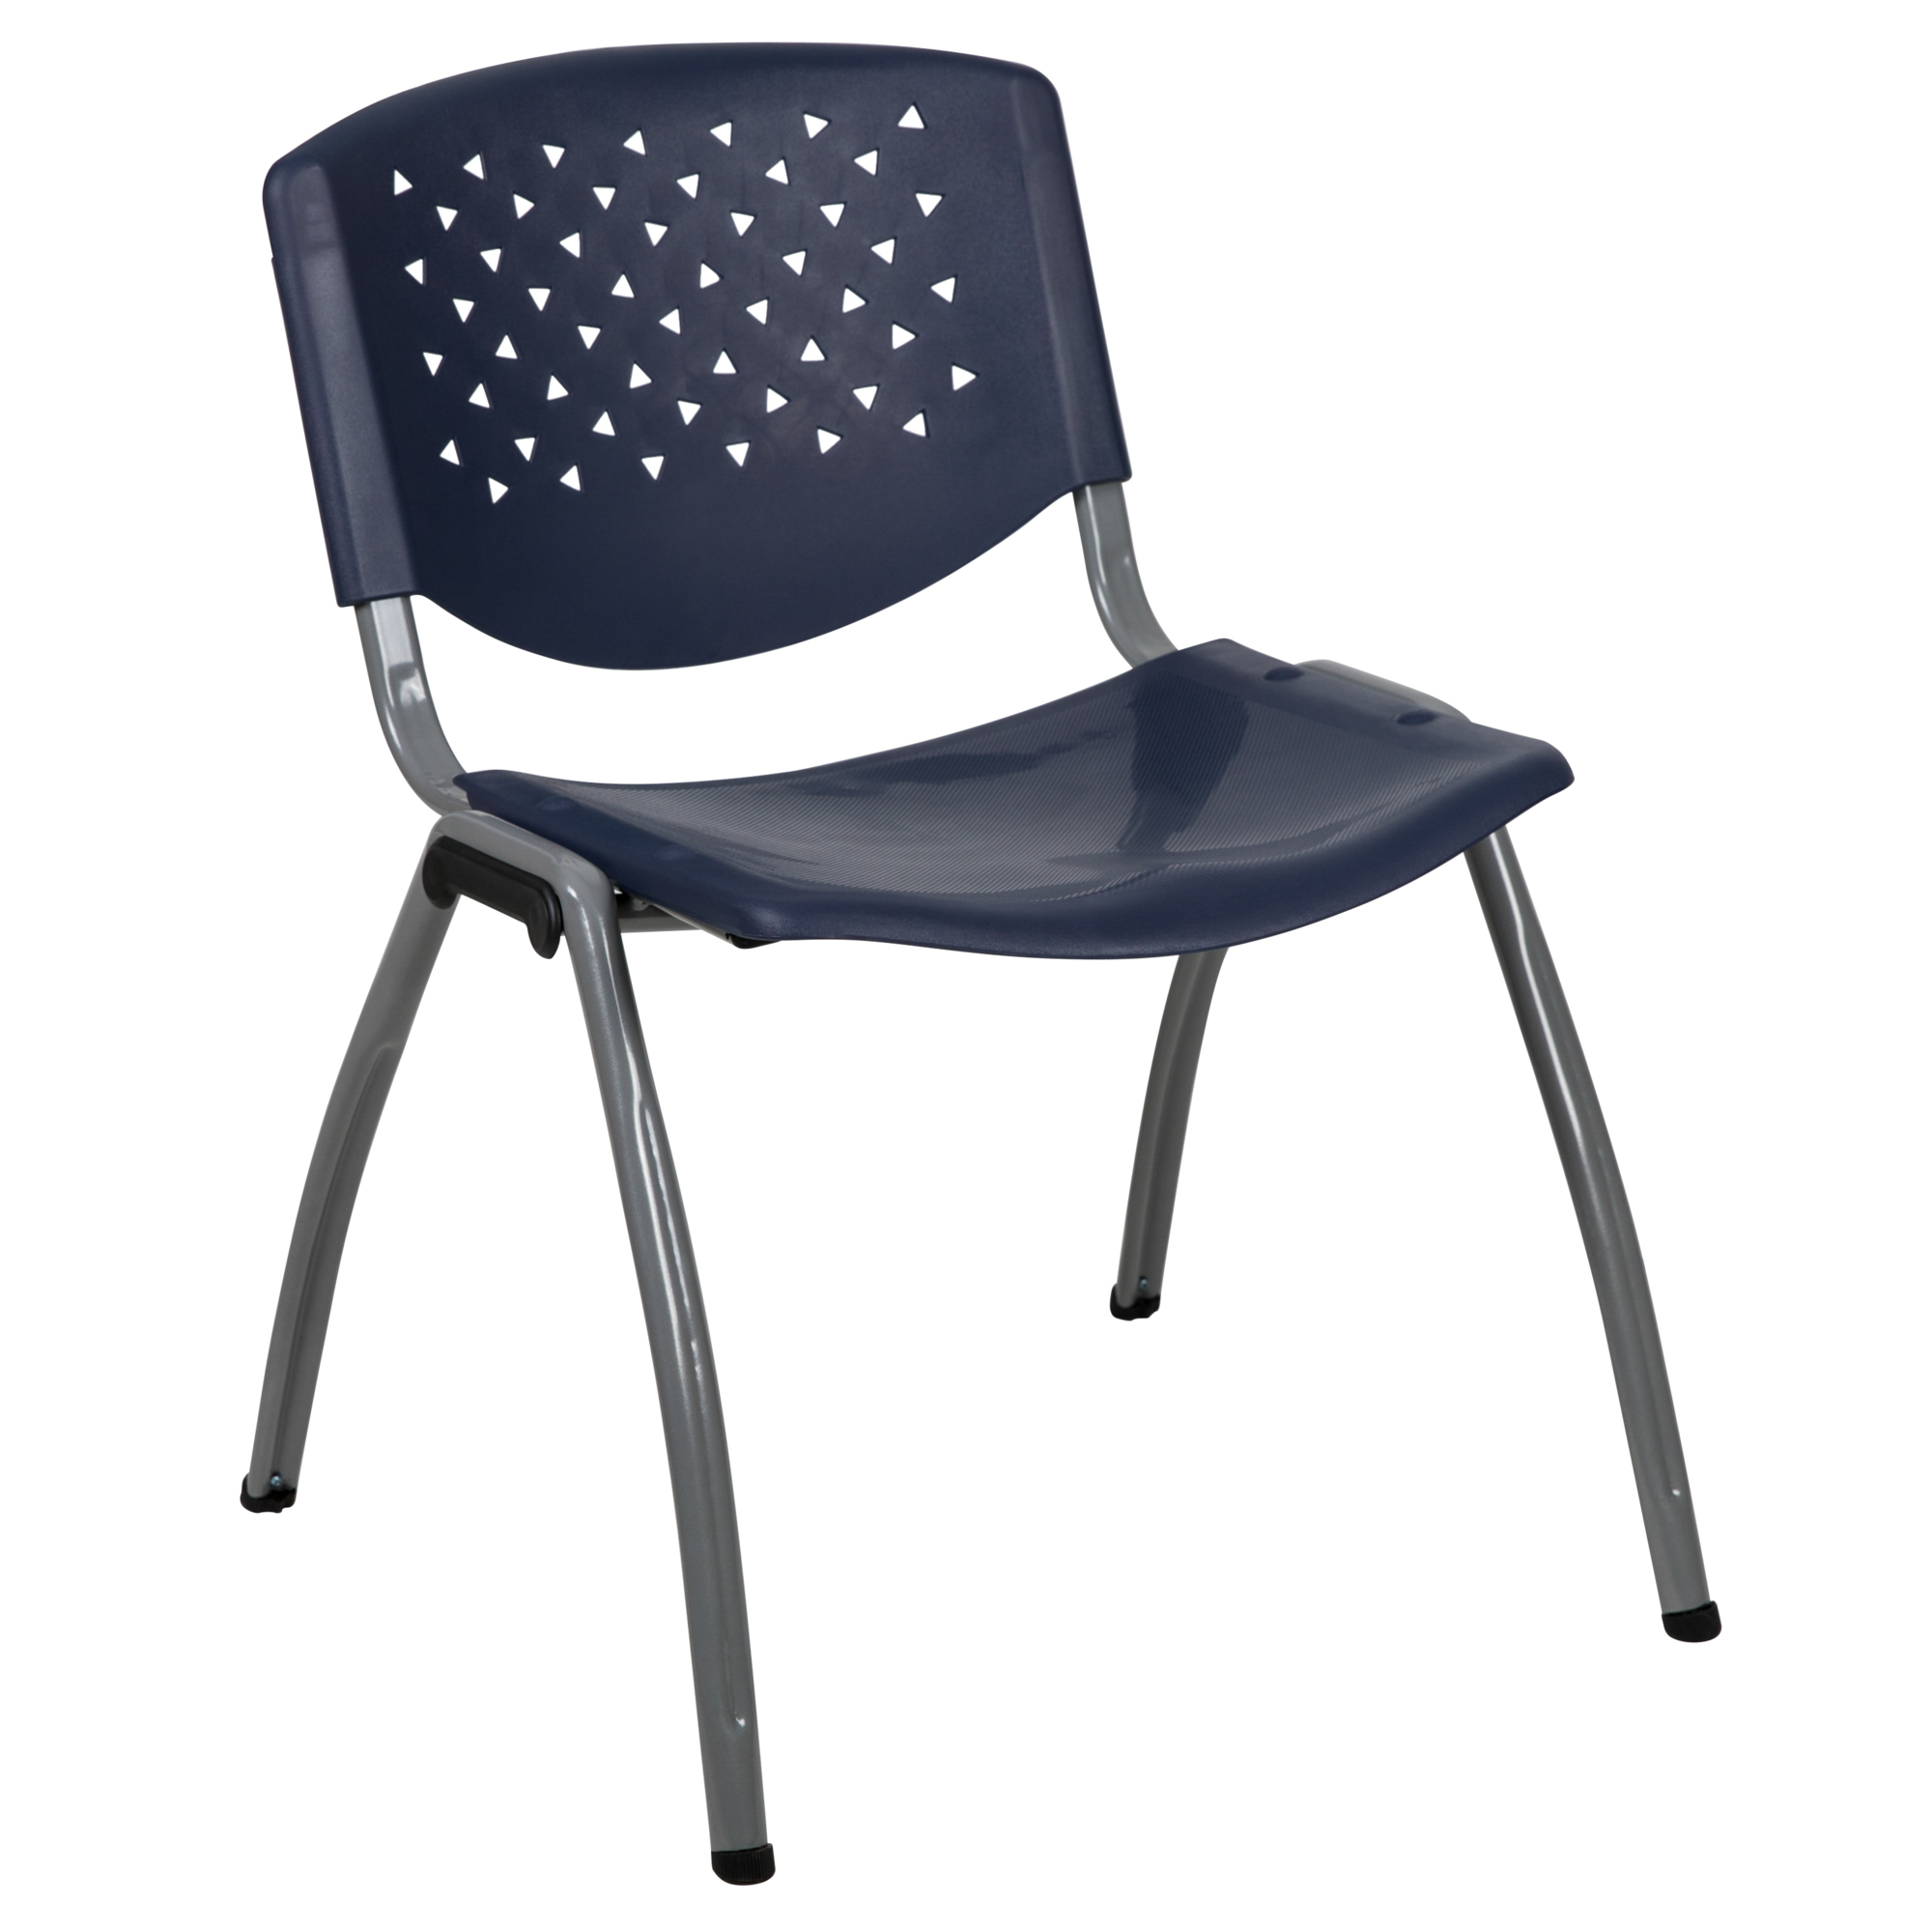 Flash Furniture, Navy Plastic Stack Chair with Perforated Back, Primary Color Blue, Included (qty.) 1, Model RUTF01ANY